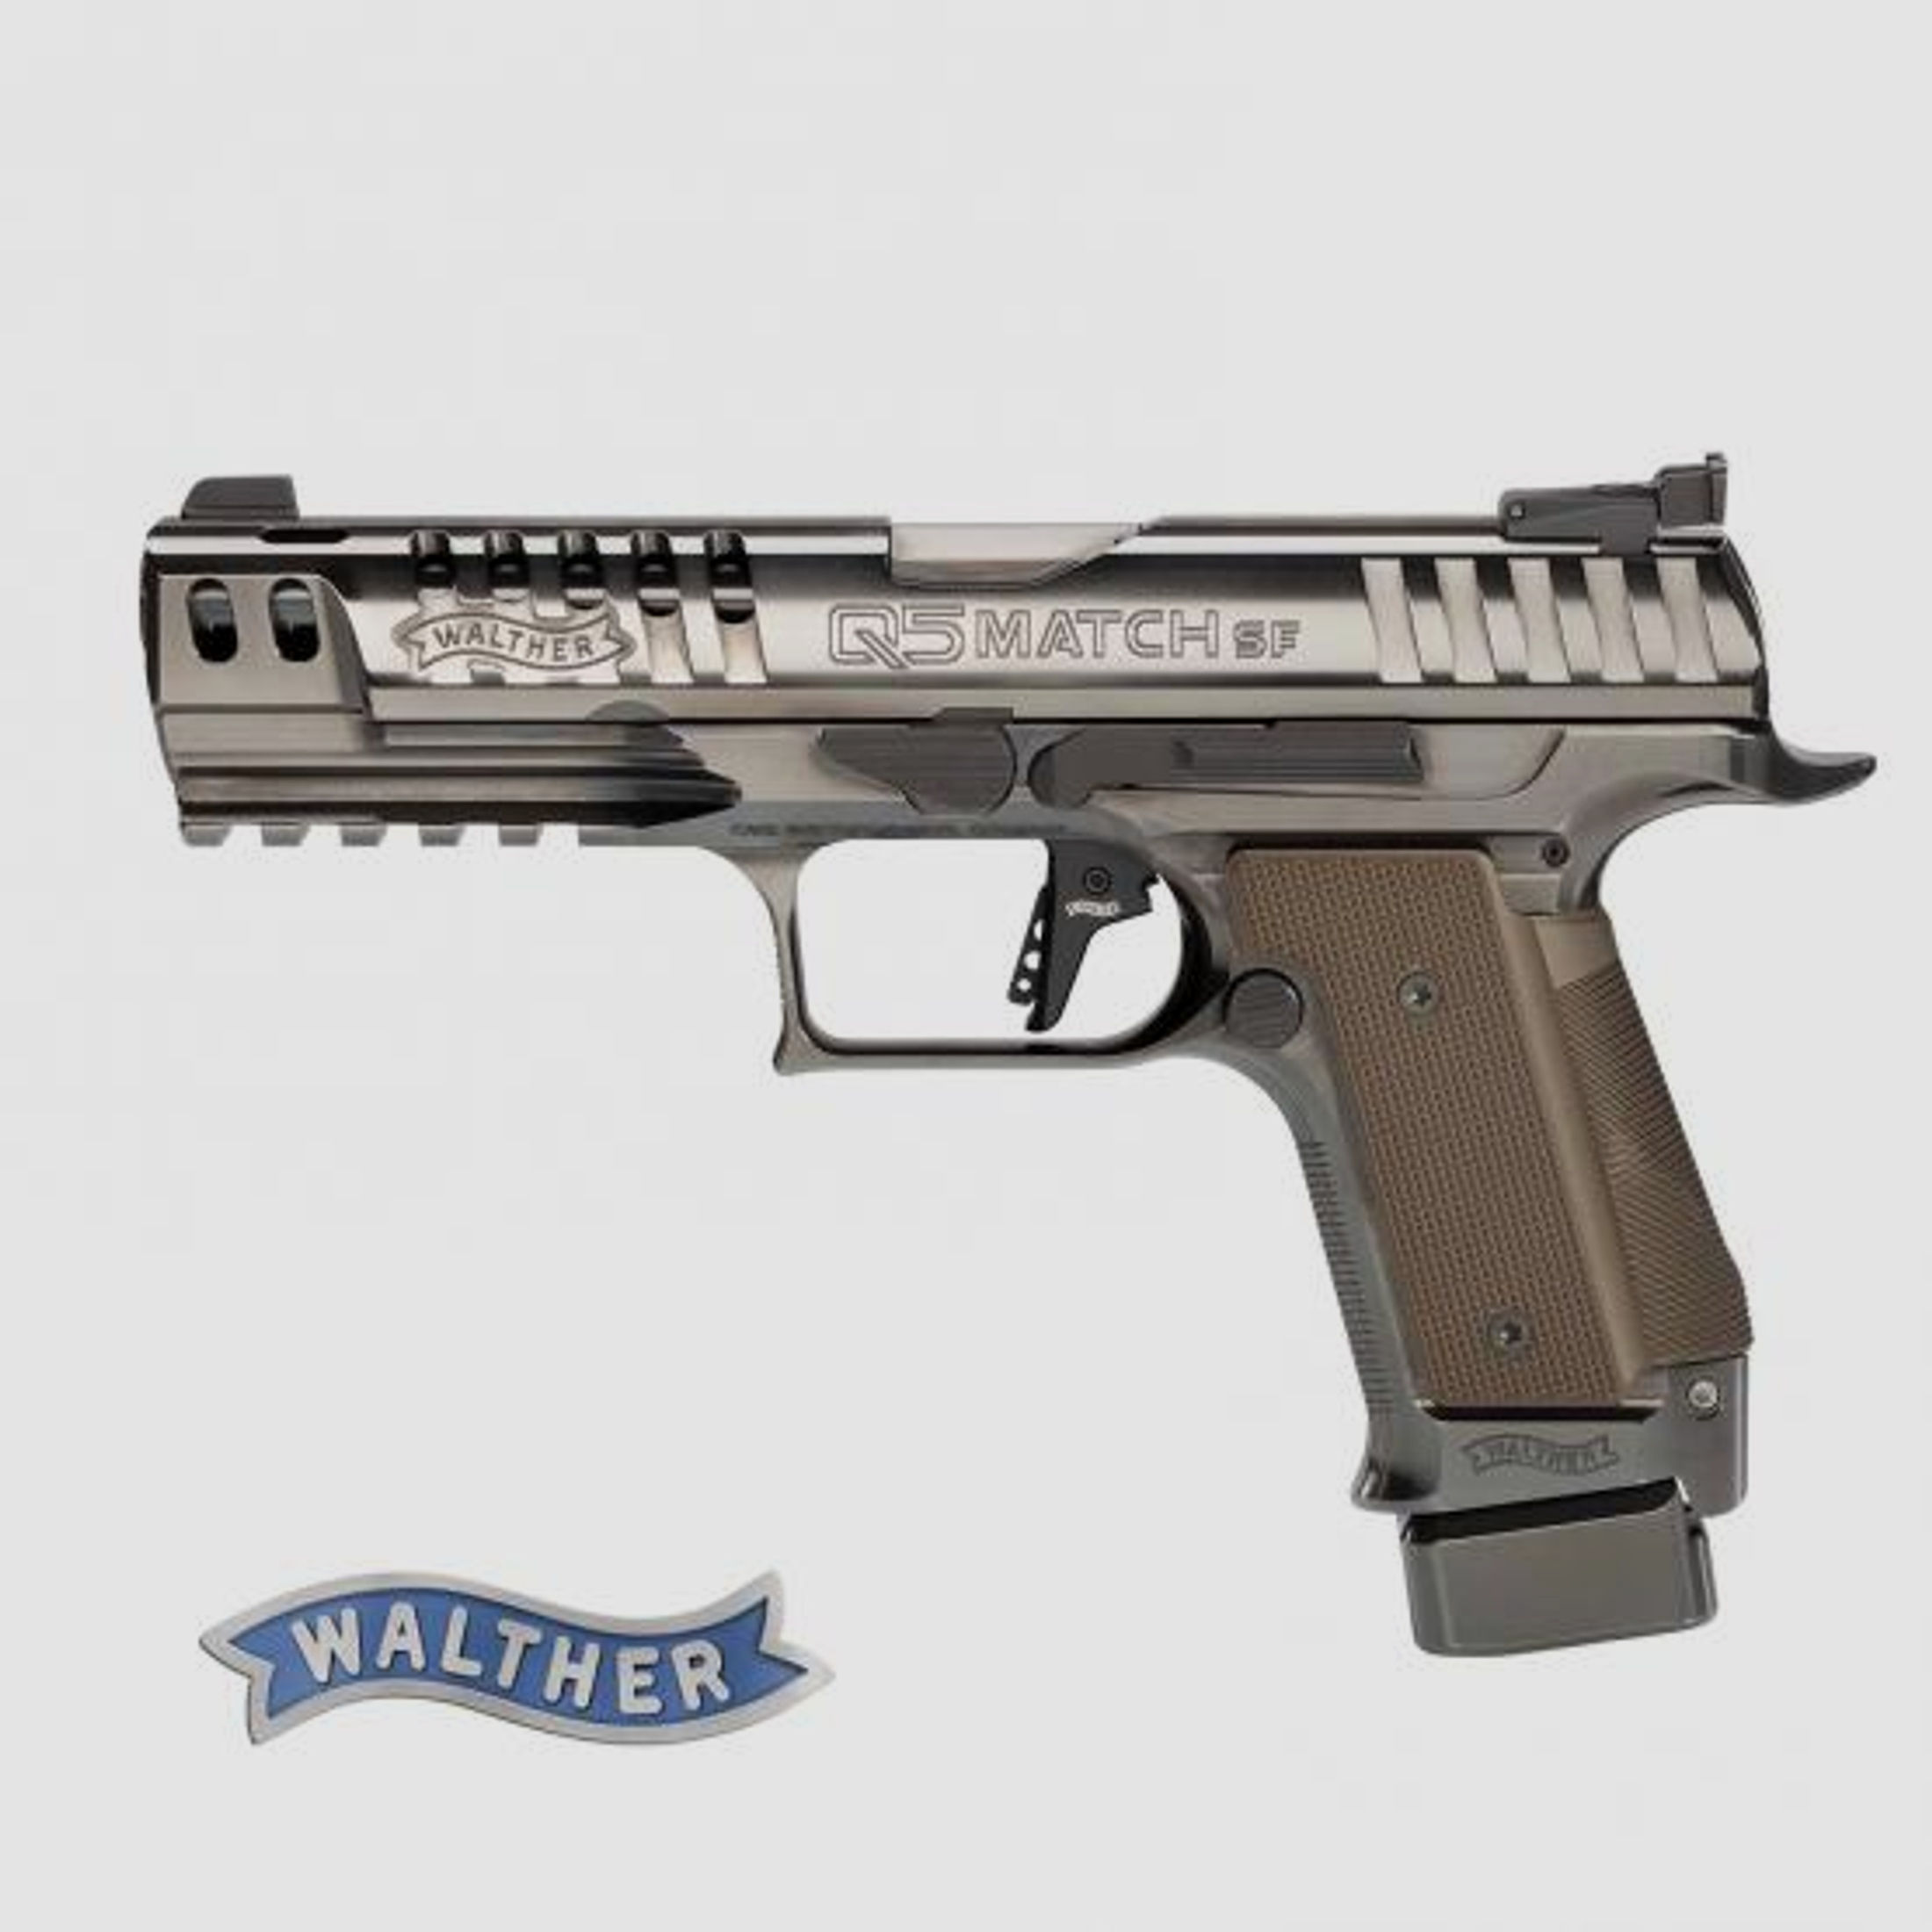 Walther Q5 Match SF Black Diamond 9mm Luger Pistole